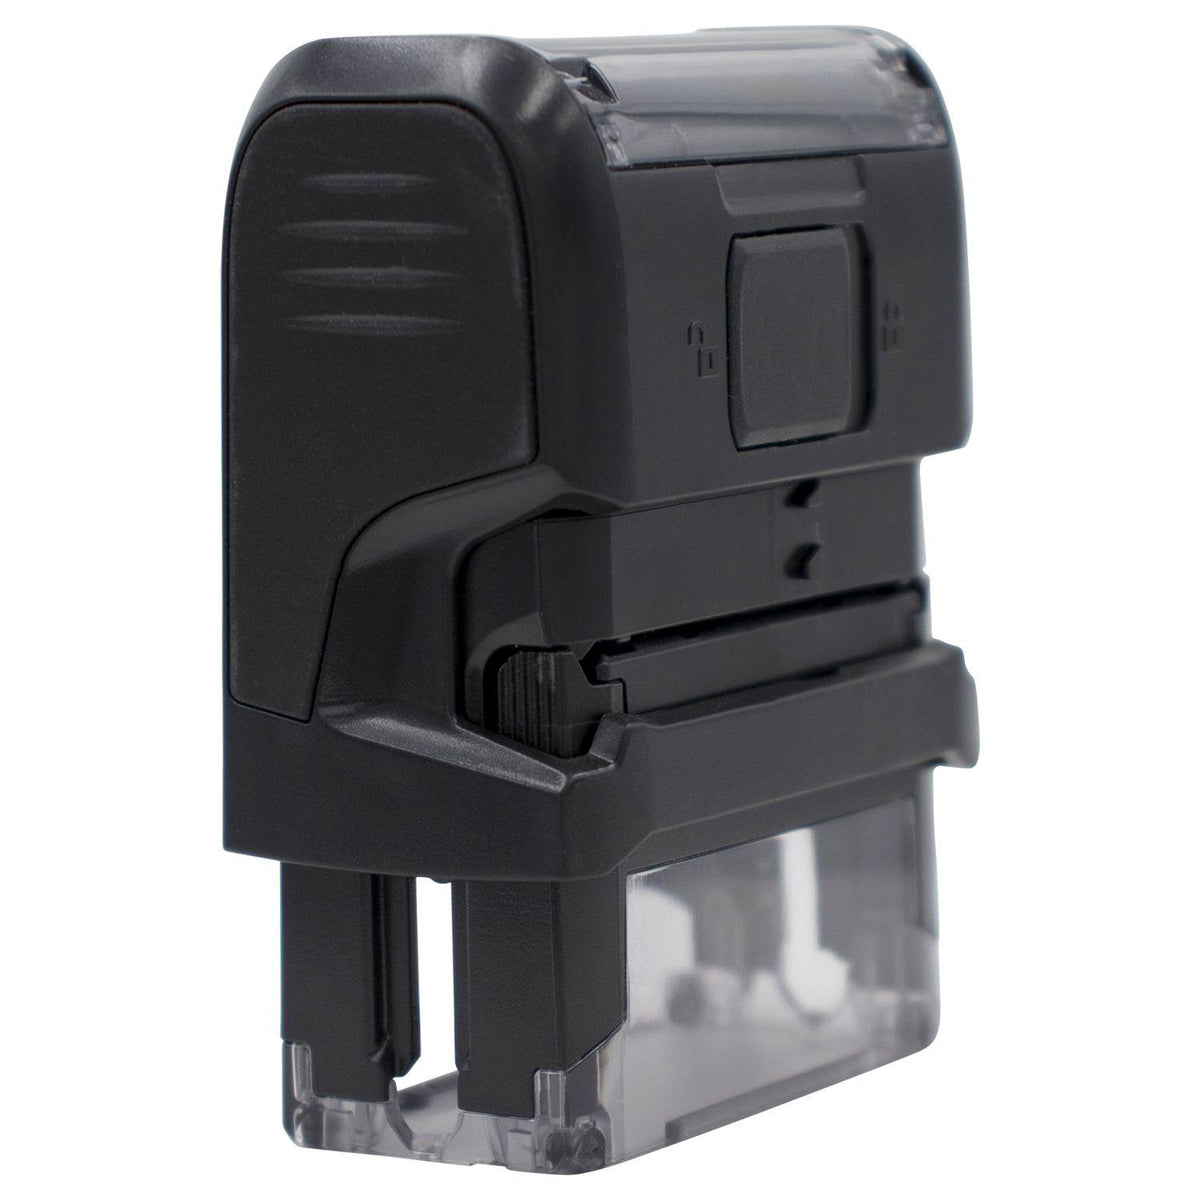 Self-Inking Secret Stamp - Engineer Seal Stamps - Brand_Trodat, Impression Size_Small, Stamp Type_Self-Inking Stamp, Type of Use_General, Type of Use_Legal, Type of Use_Medical Office, Type of Use_Office